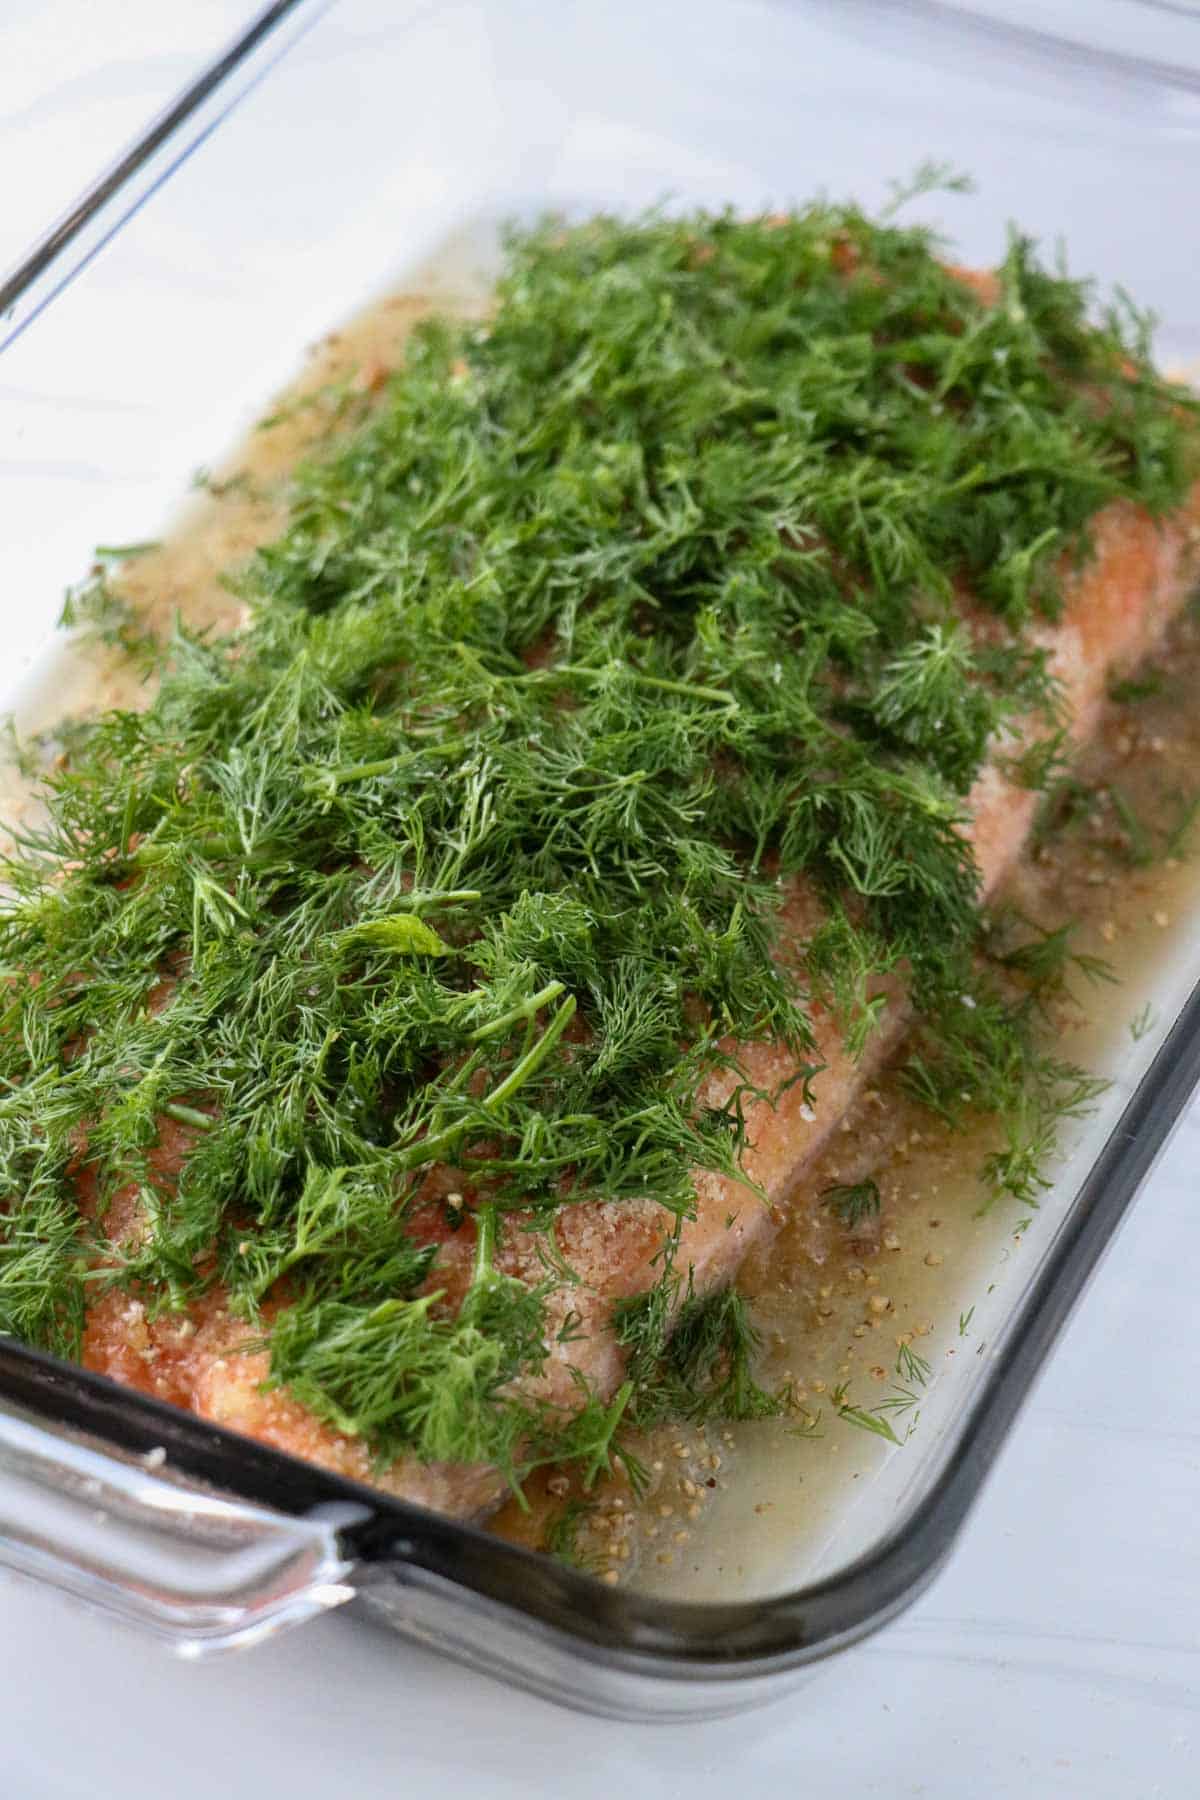 Salmon in a glass dish covered with chopped dill.